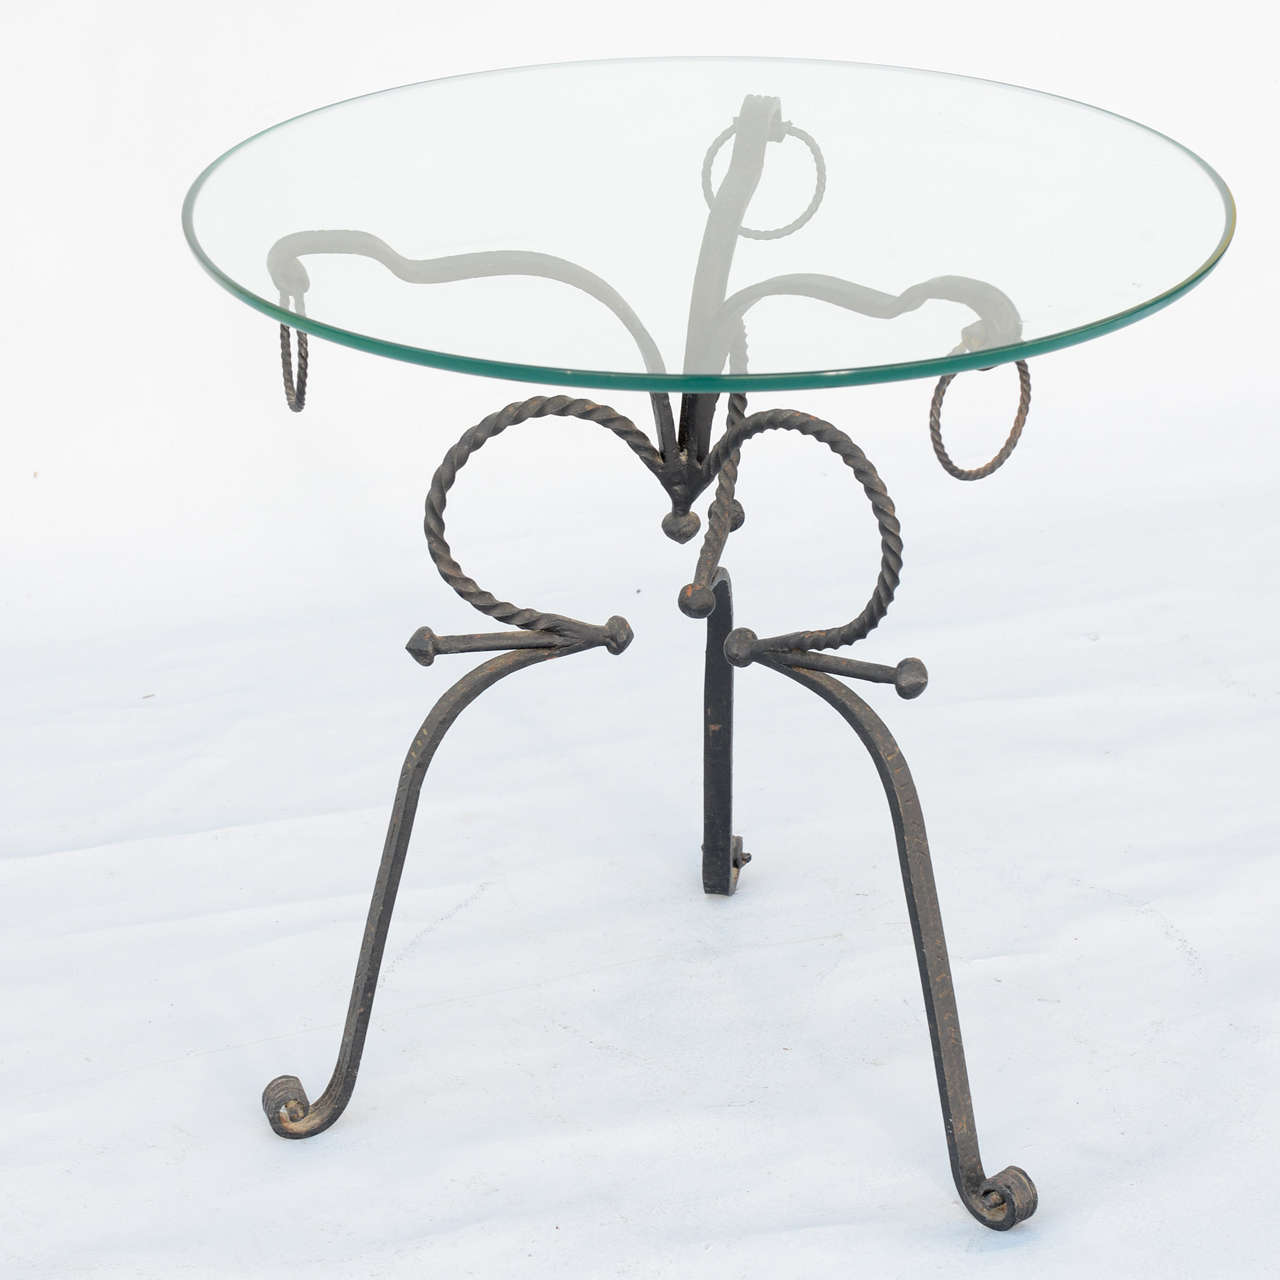 Occasional table, having a top of round glass, on tripartite base of scrolling hand-wrought iron, each hock-leg decorated by rings and ending in scroll feet.

Stock ID: D3246